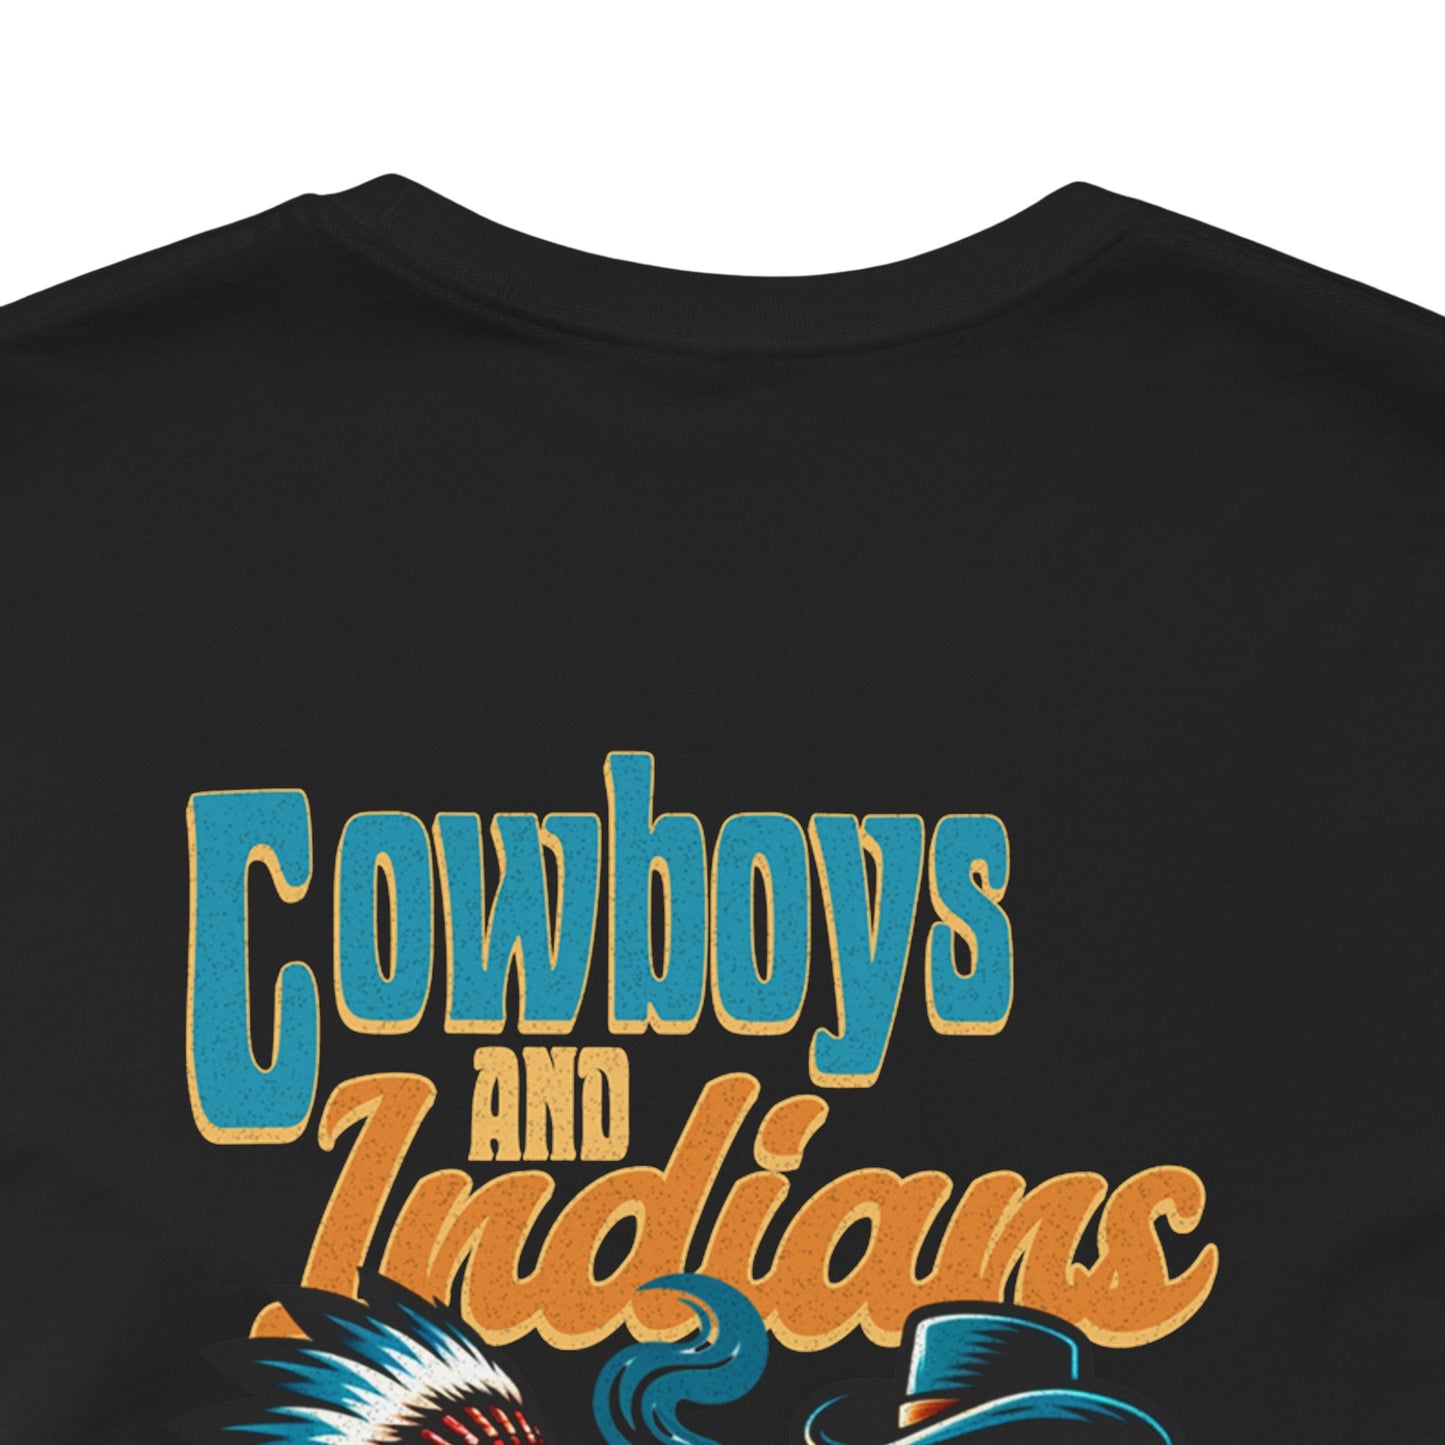 Cowboys and Indians - T-Shirt